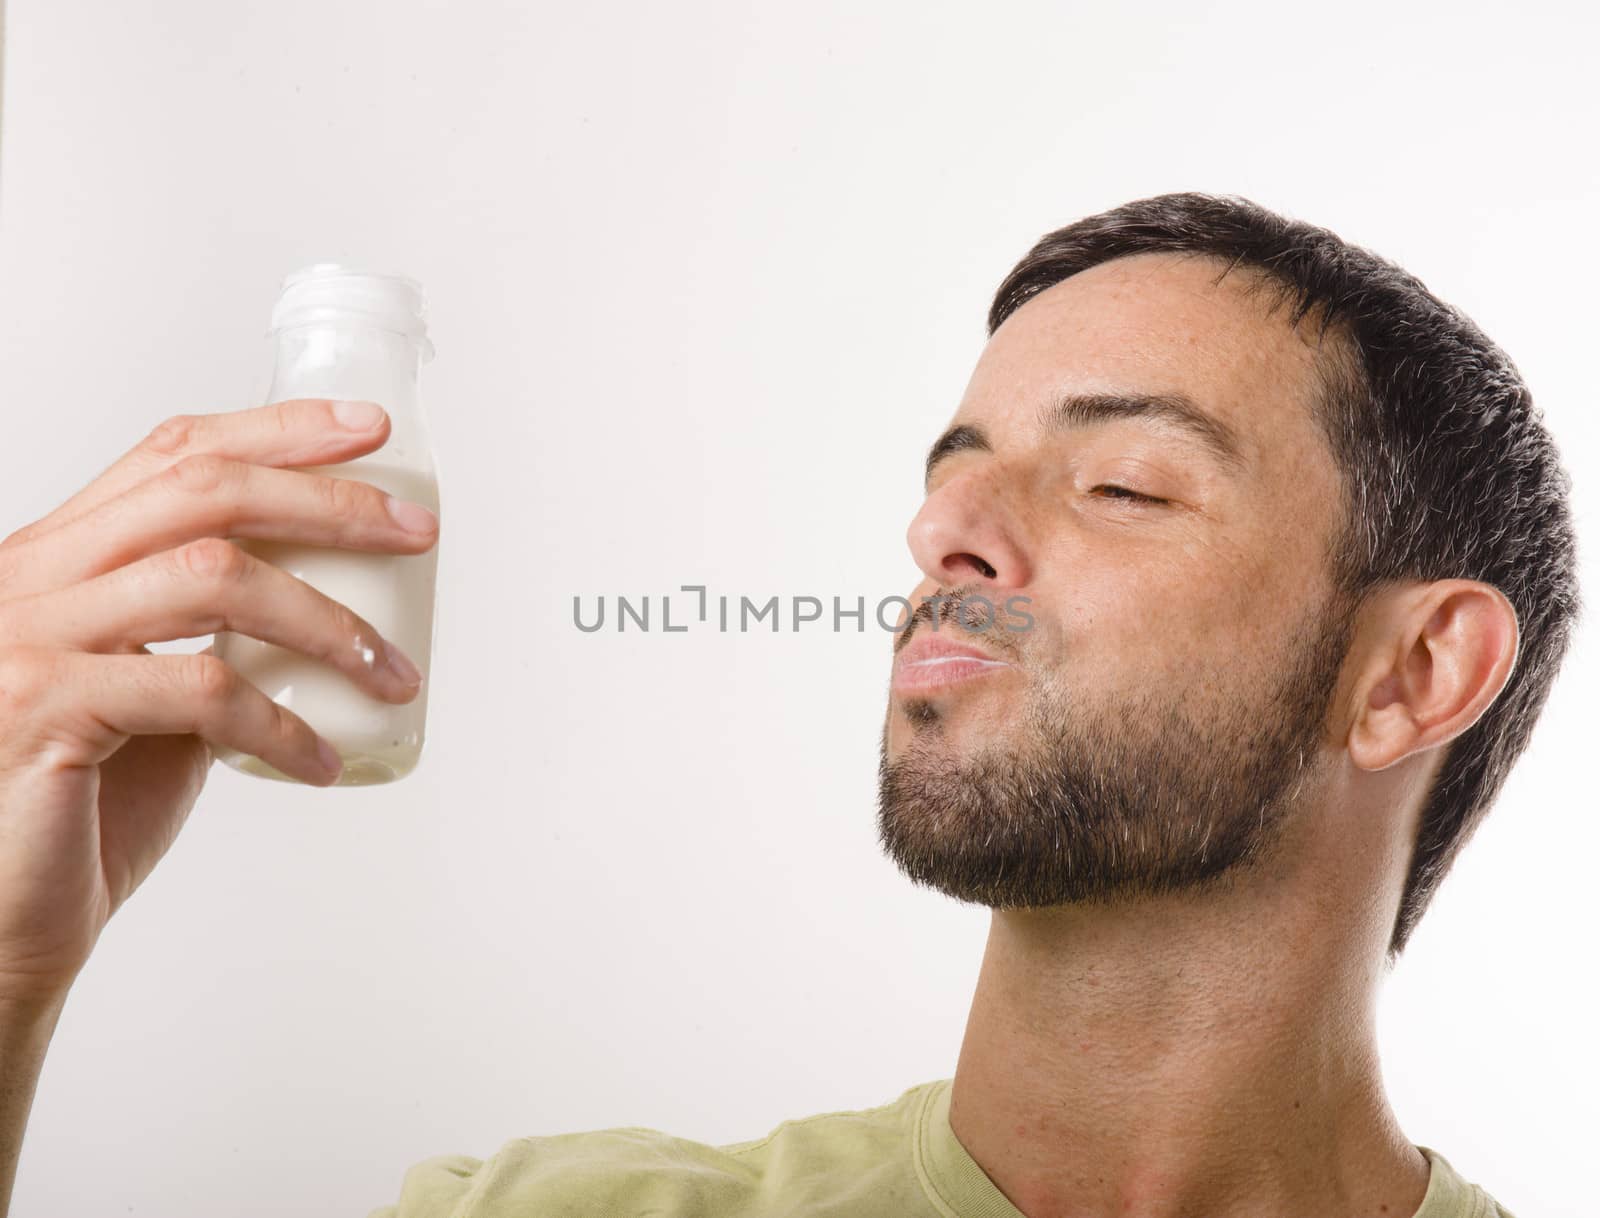 Young Handsome Man with Beard drinking Milk and Yogurt isolated on White Background